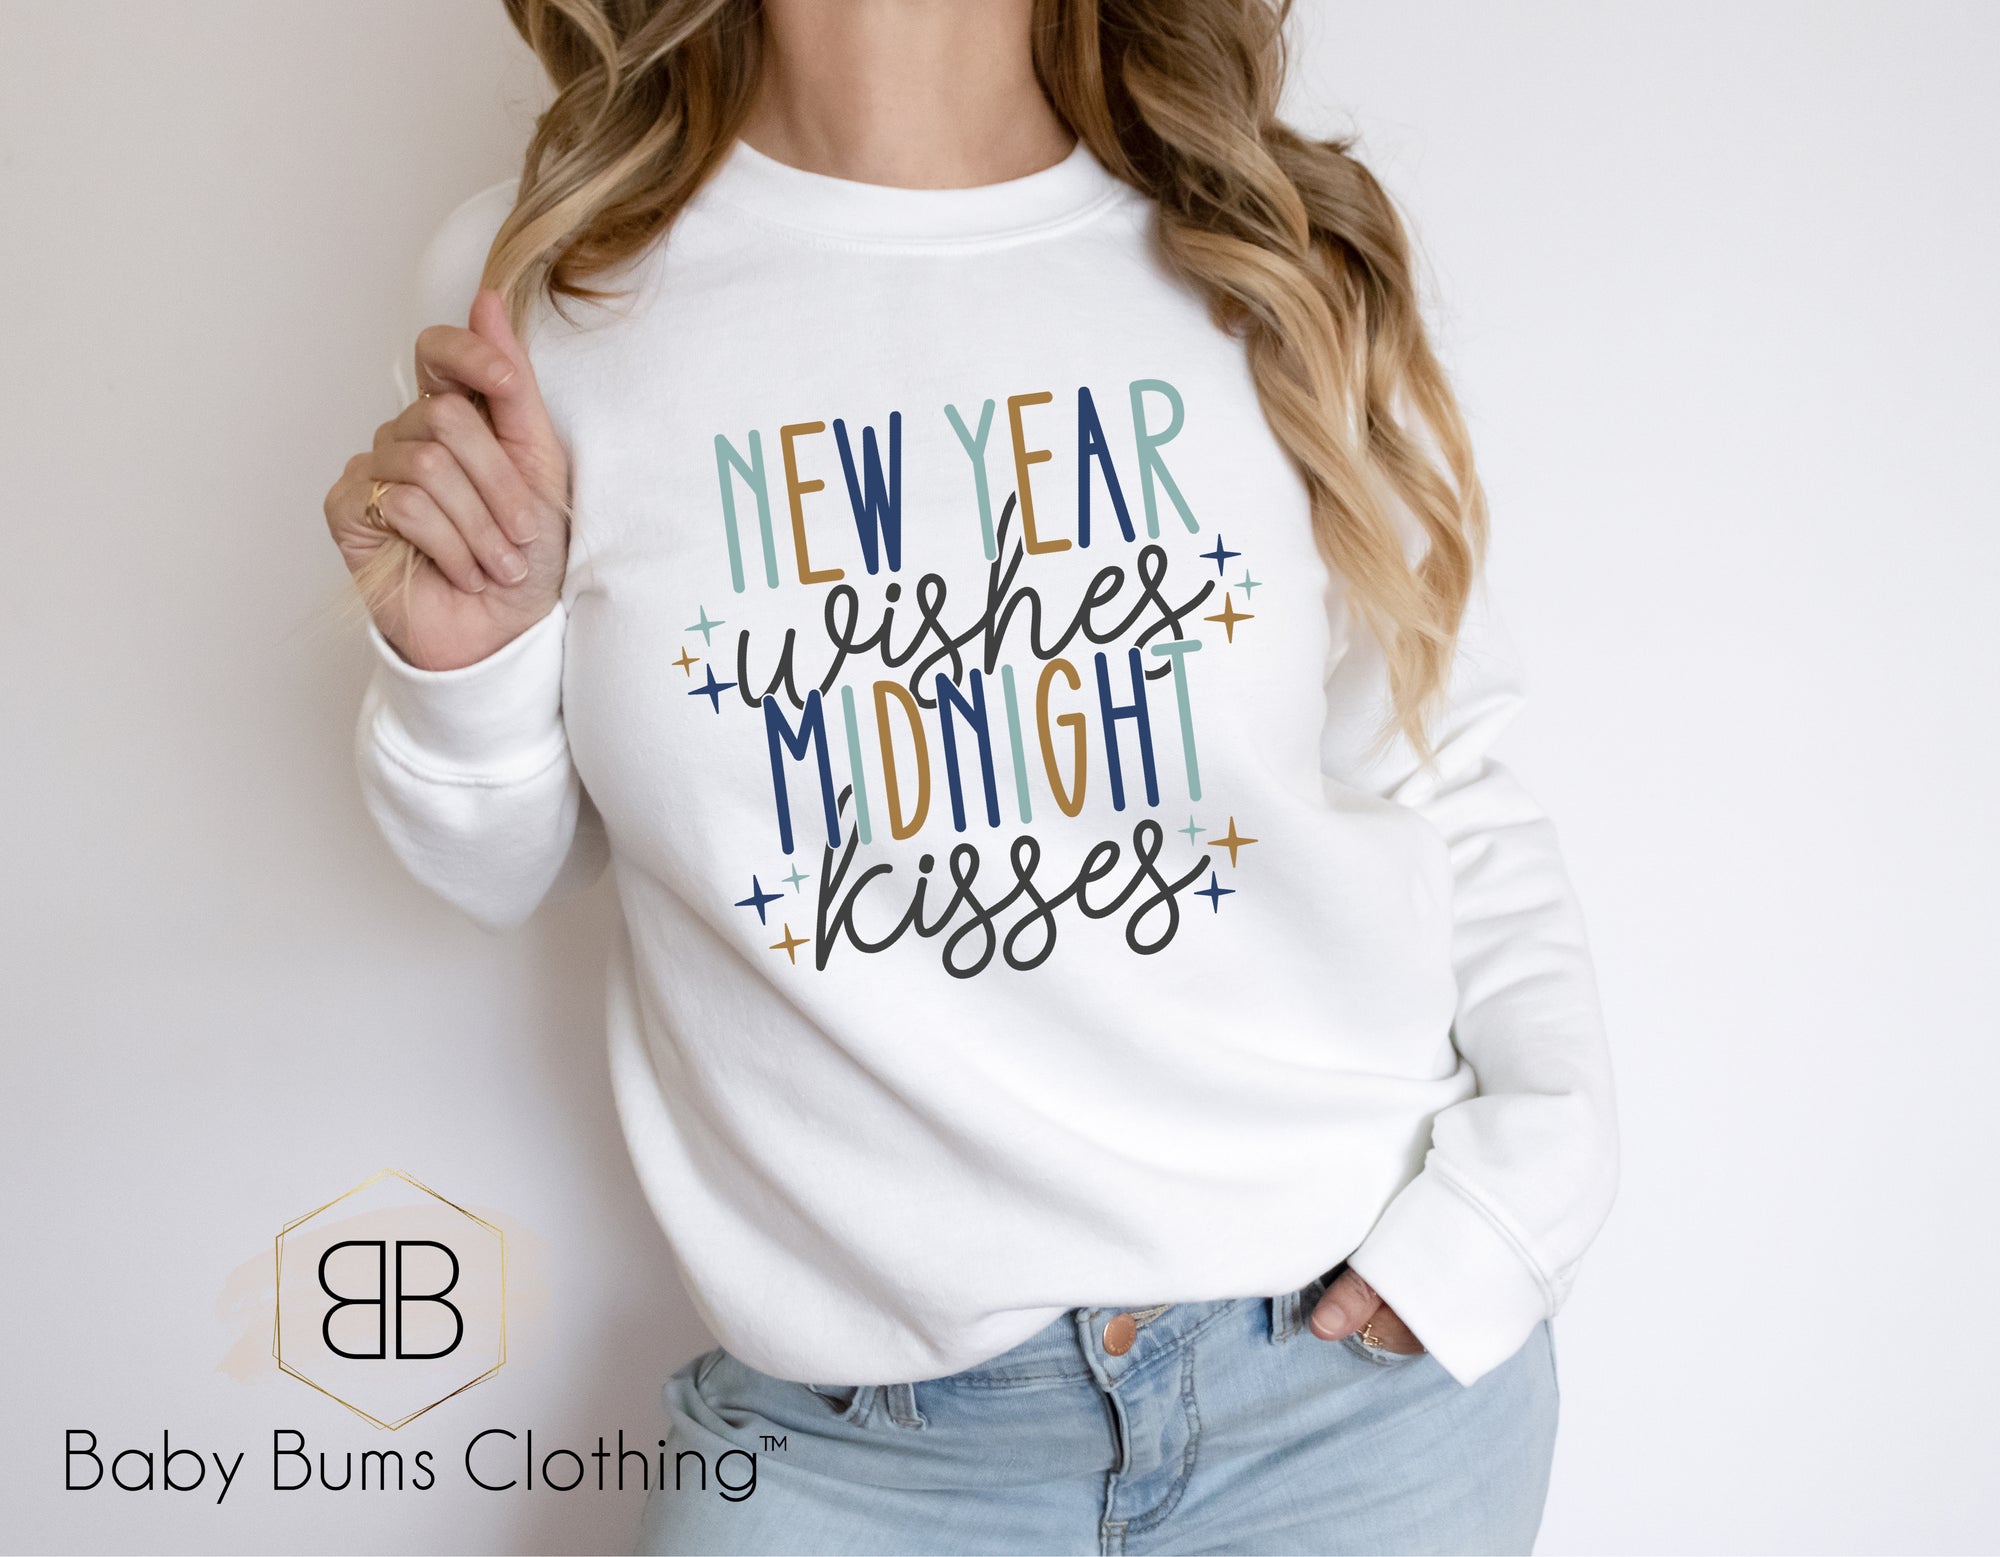 NEW YEAR WISHES AND KISSES ADULT UNISEX T-SHIRT - Baby Bums Clothing 